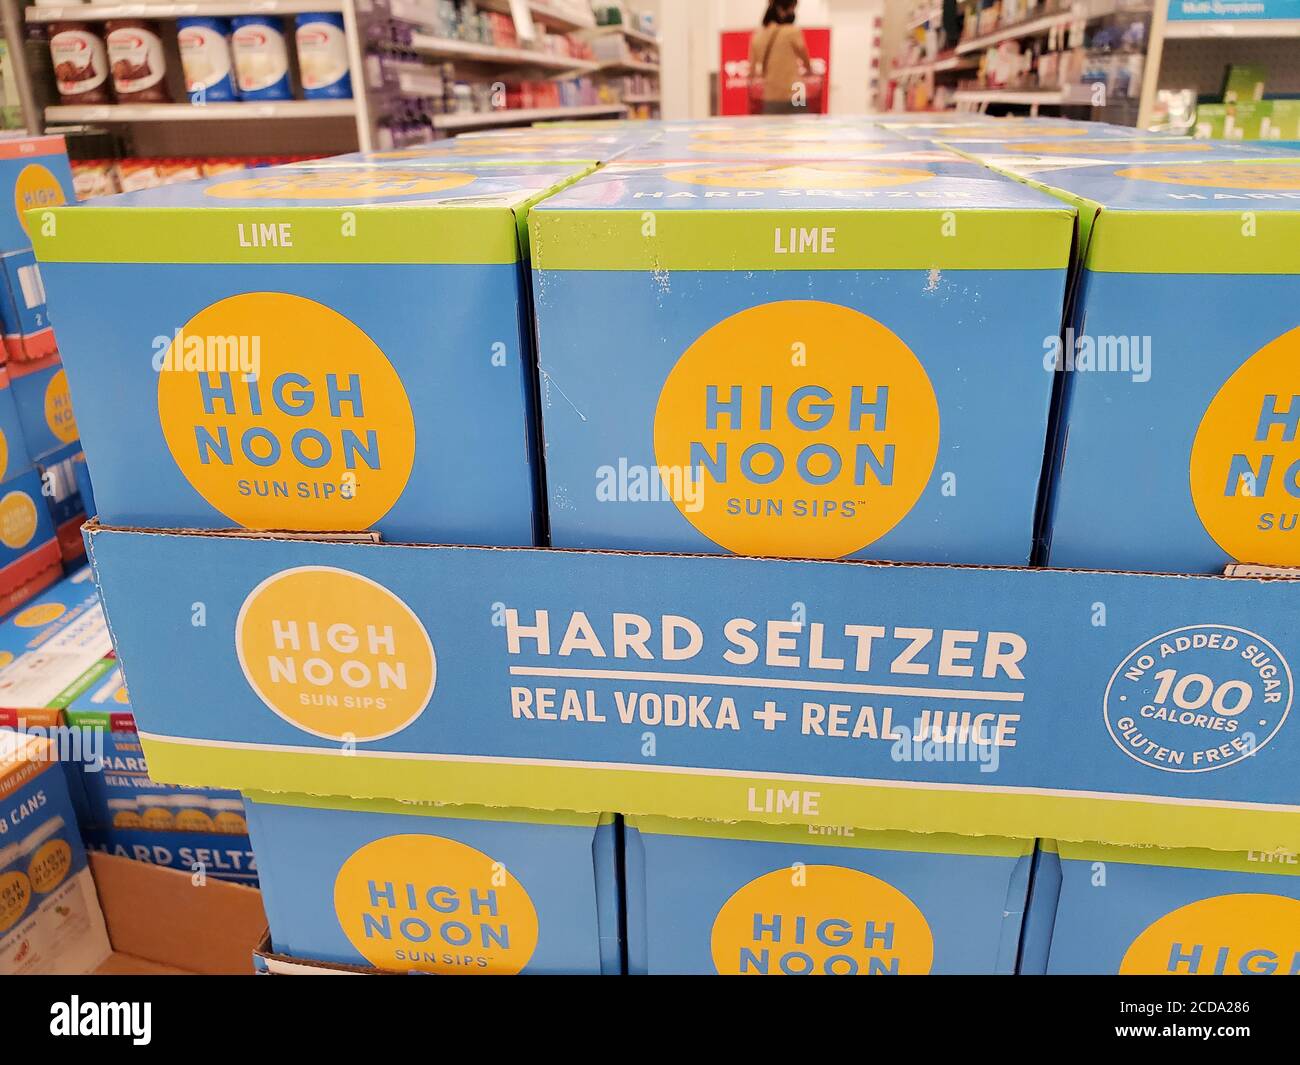 Close-up of a stack of containers of High Noon brand hard seltzer, San Ramon, California, July 23, 2020. () Stock Photo